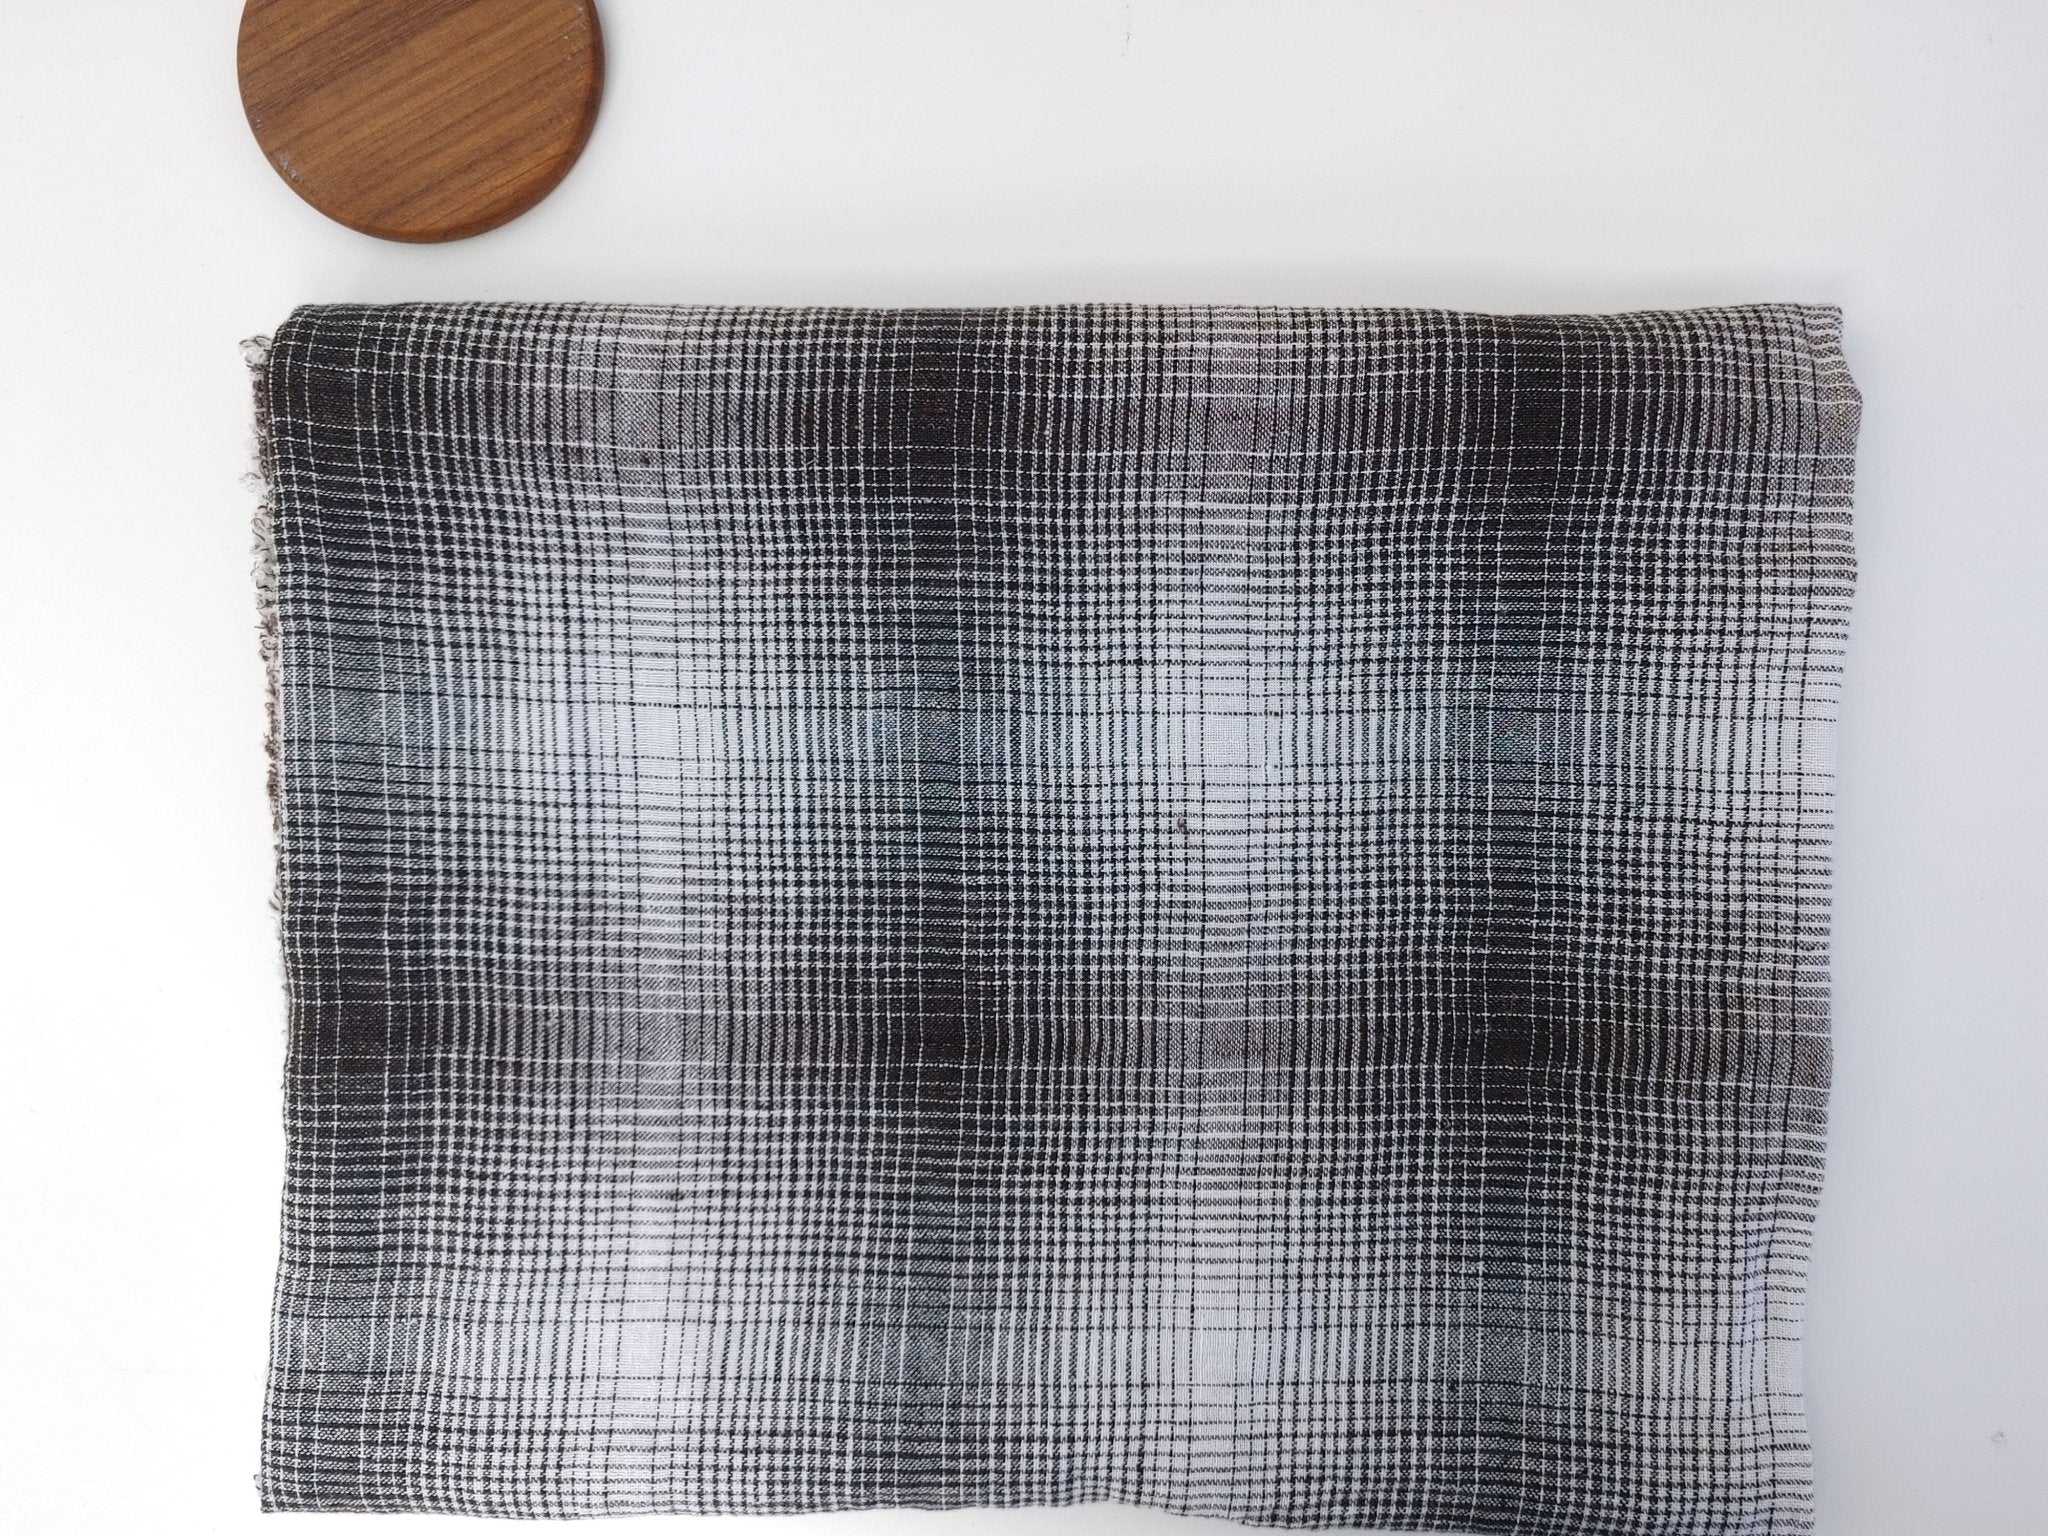 Linen Polyester Gradation Plaid Fabric 7241 7764 7765 7767 7768 7769 - The Linen Lab - Brown